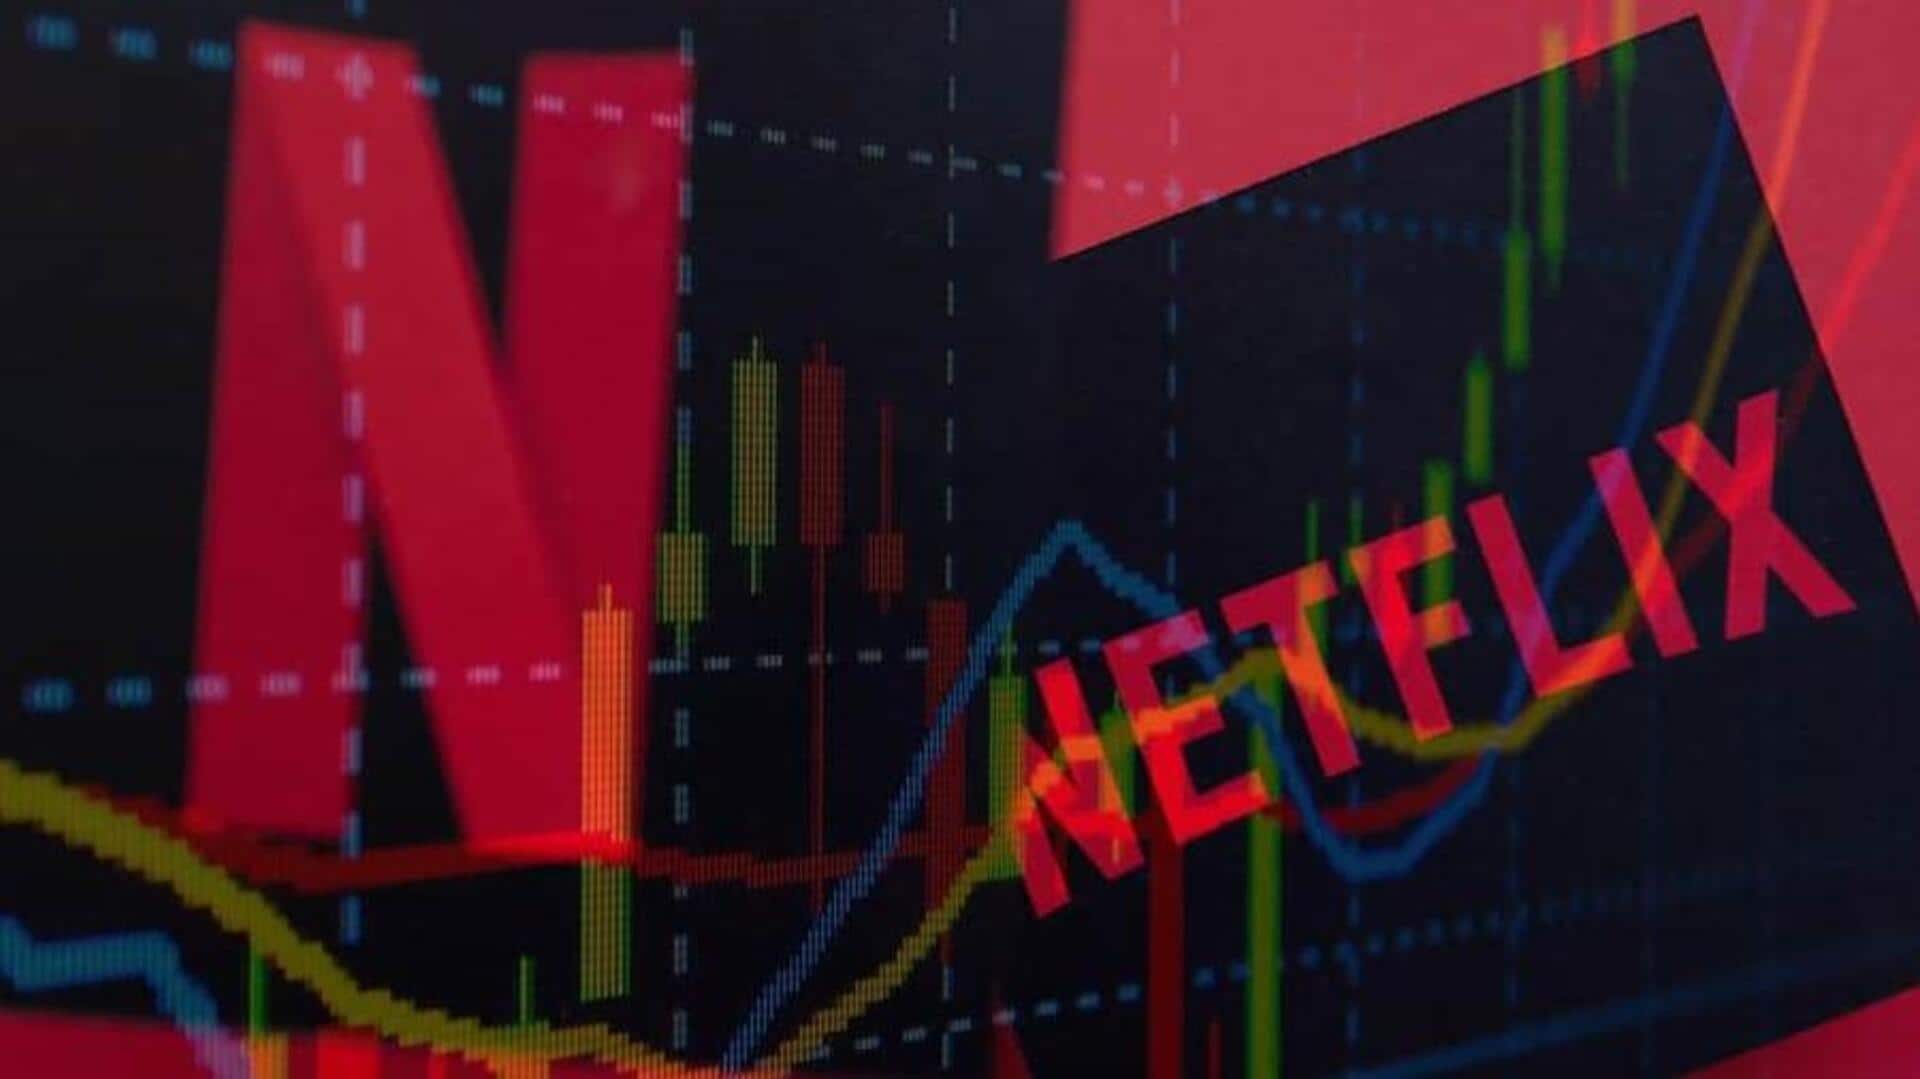 Netflix jumps over 13% in pre-market session: Here's why